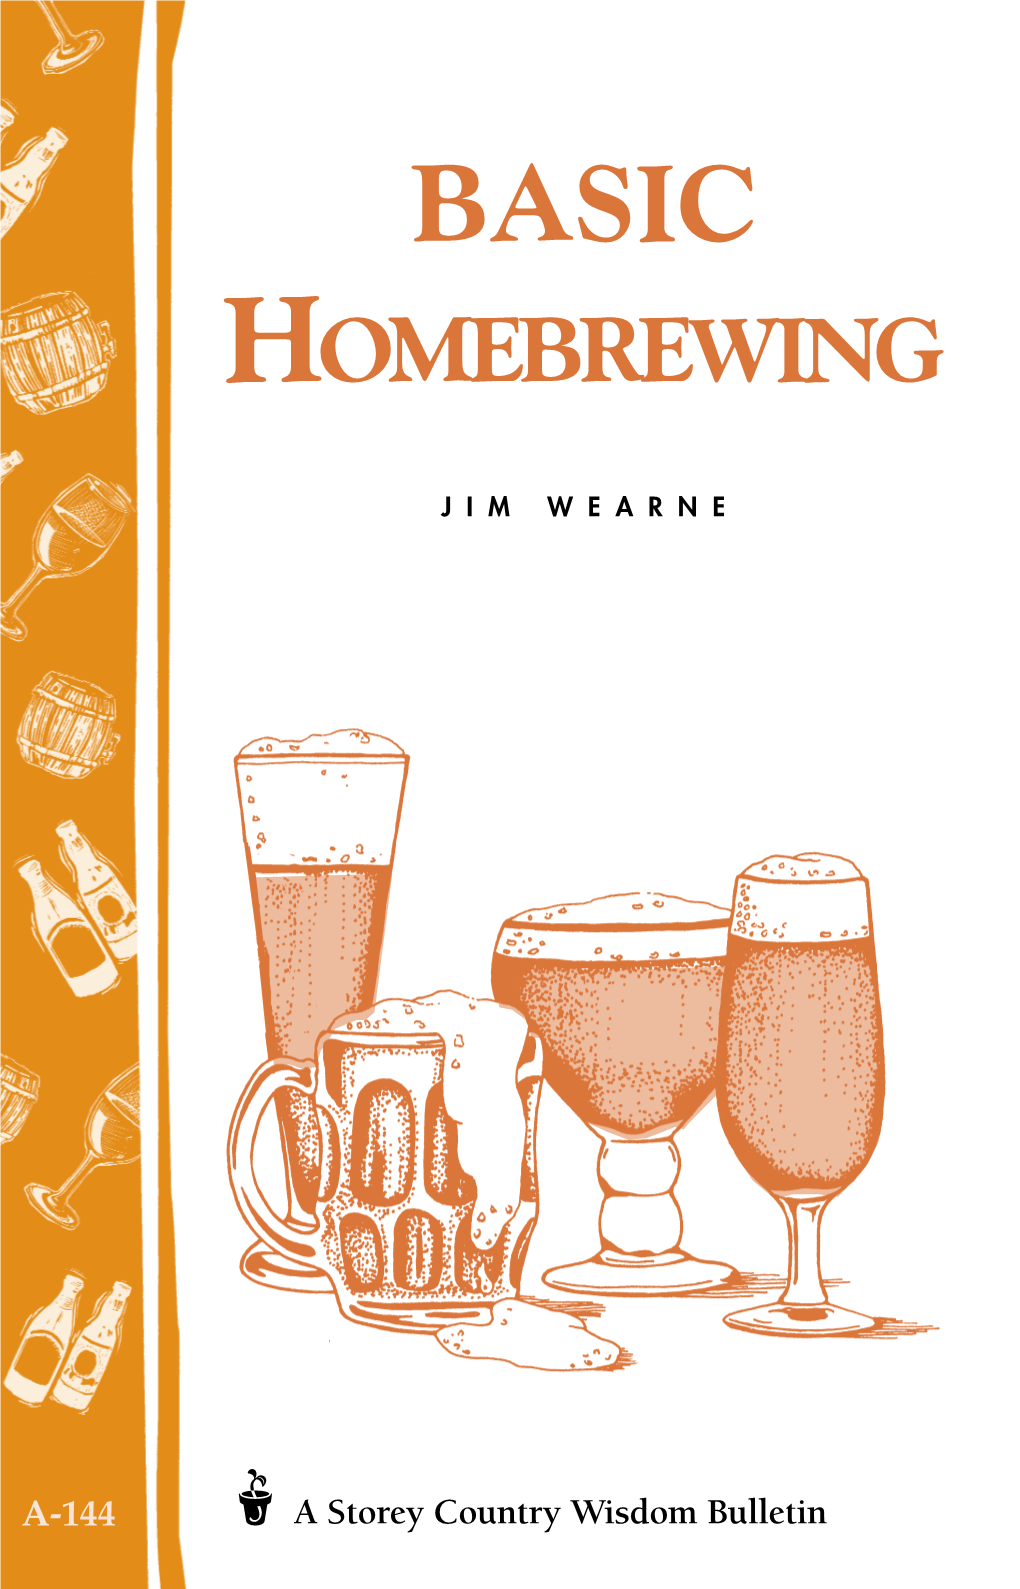 HOMEBREWING Country and City Dwellers Alike to Cultivate Personal Independence in Everyday Life